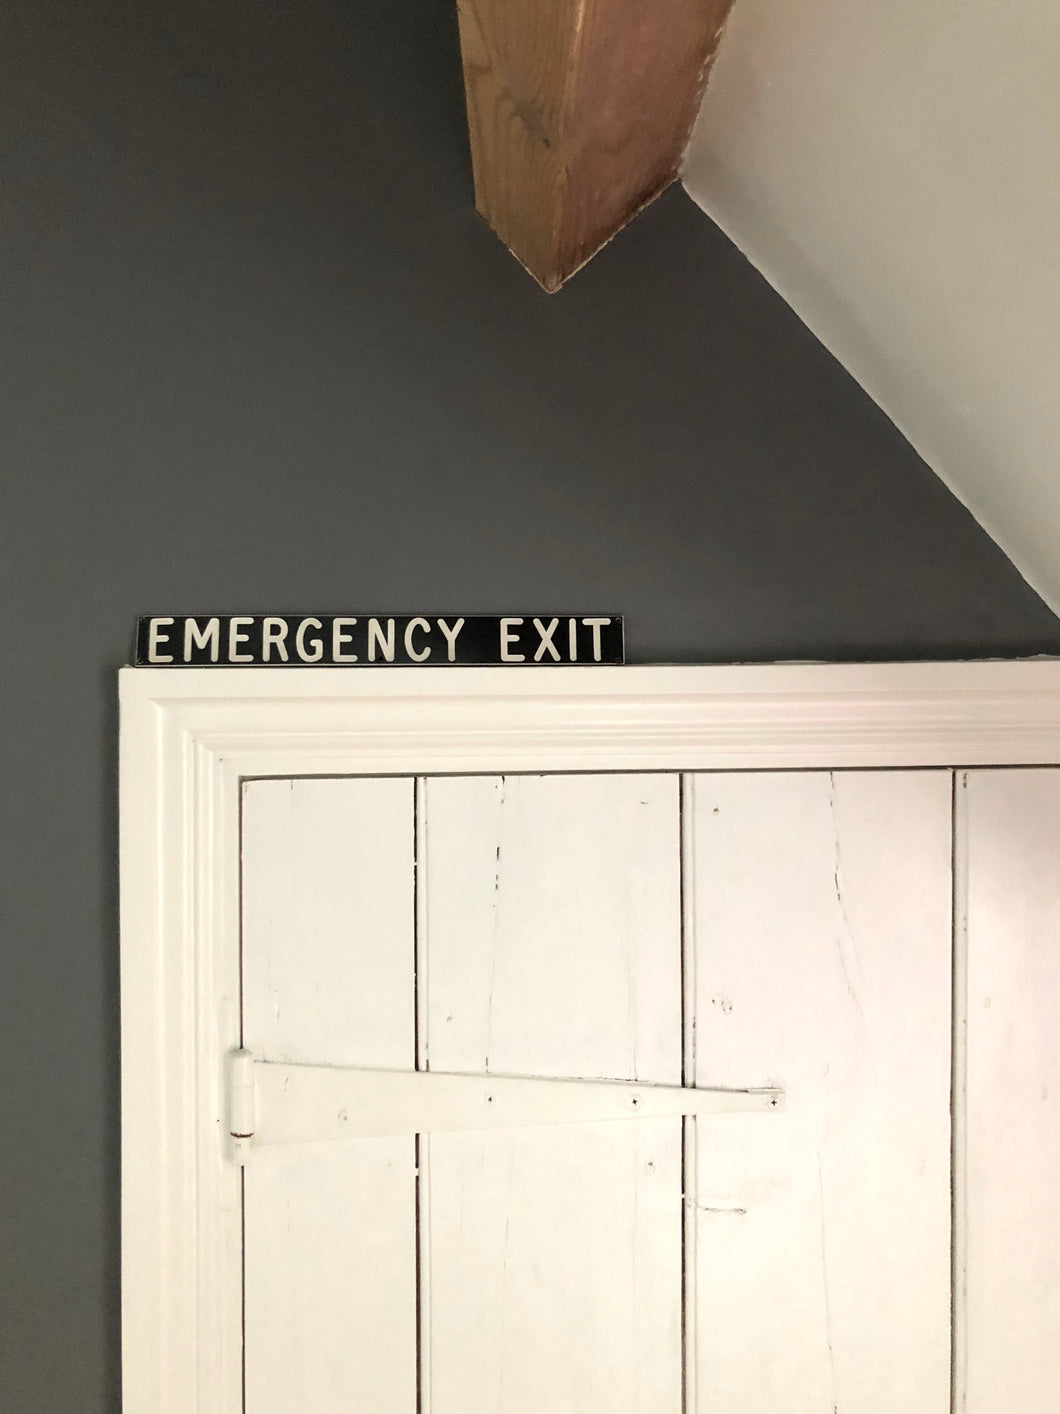 NEW - ‘Emergency Exit’ sign